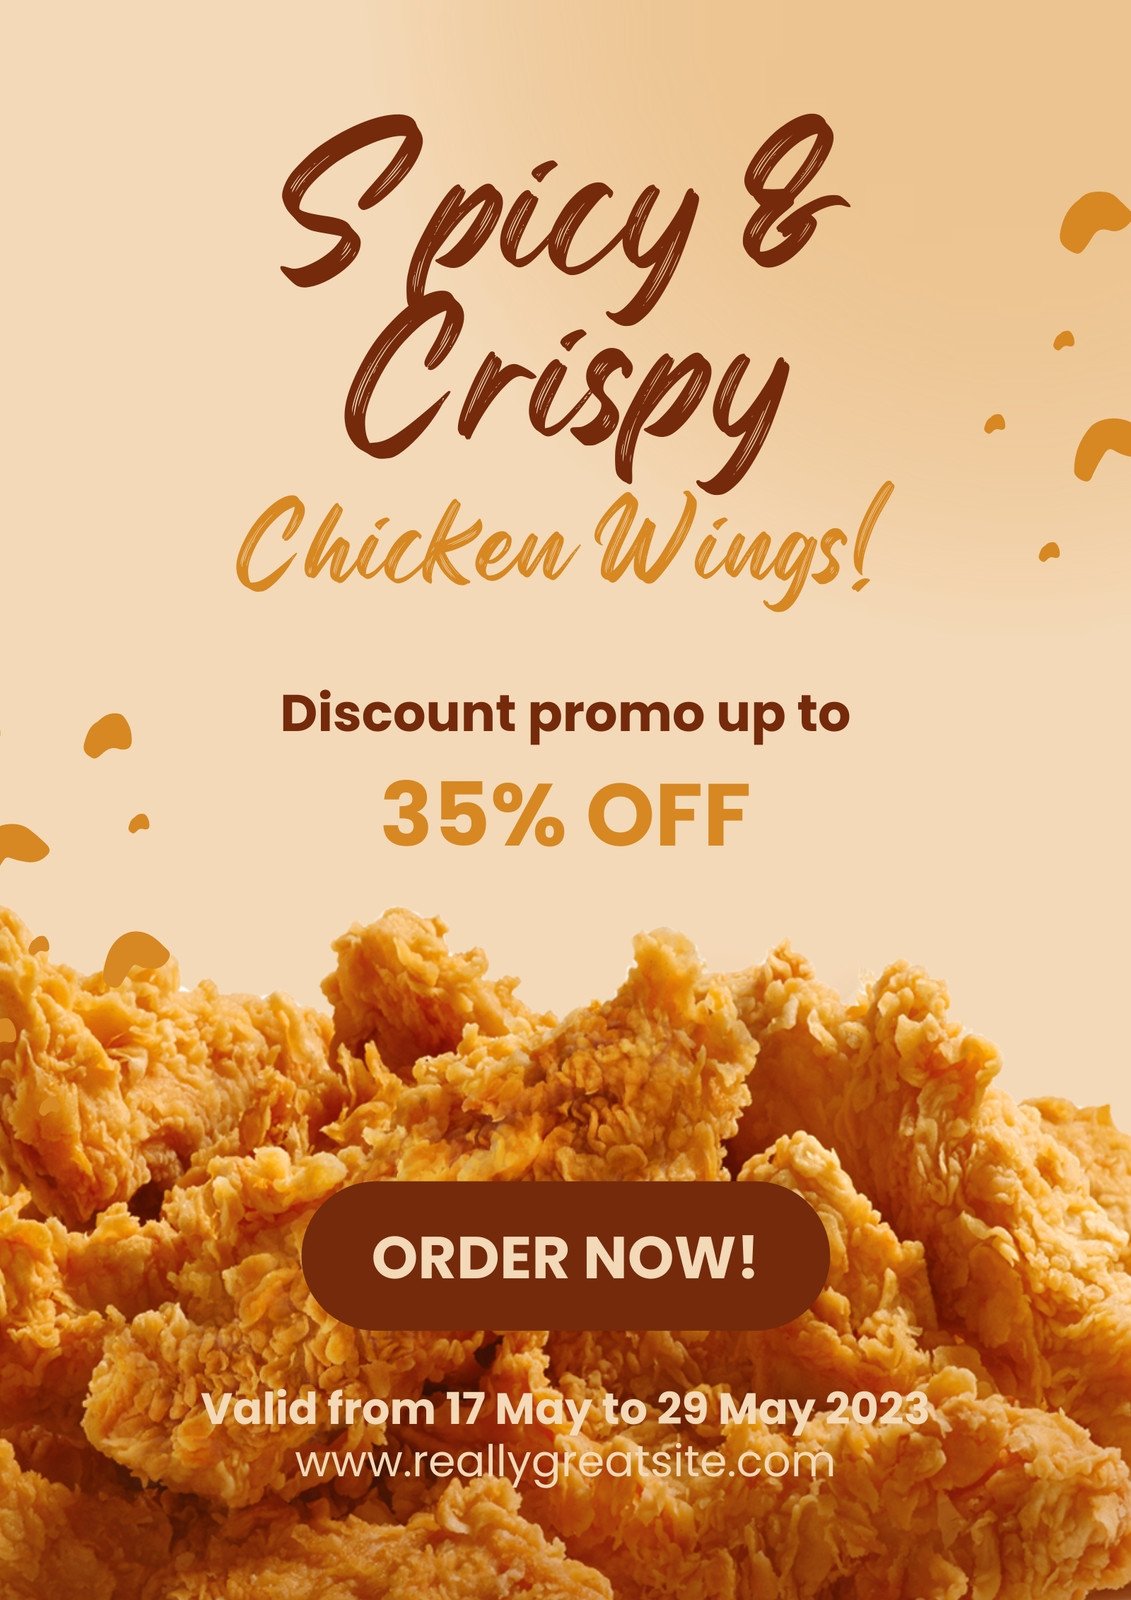 Brown and Orange Modern Spicy Chicken Wings Flyer